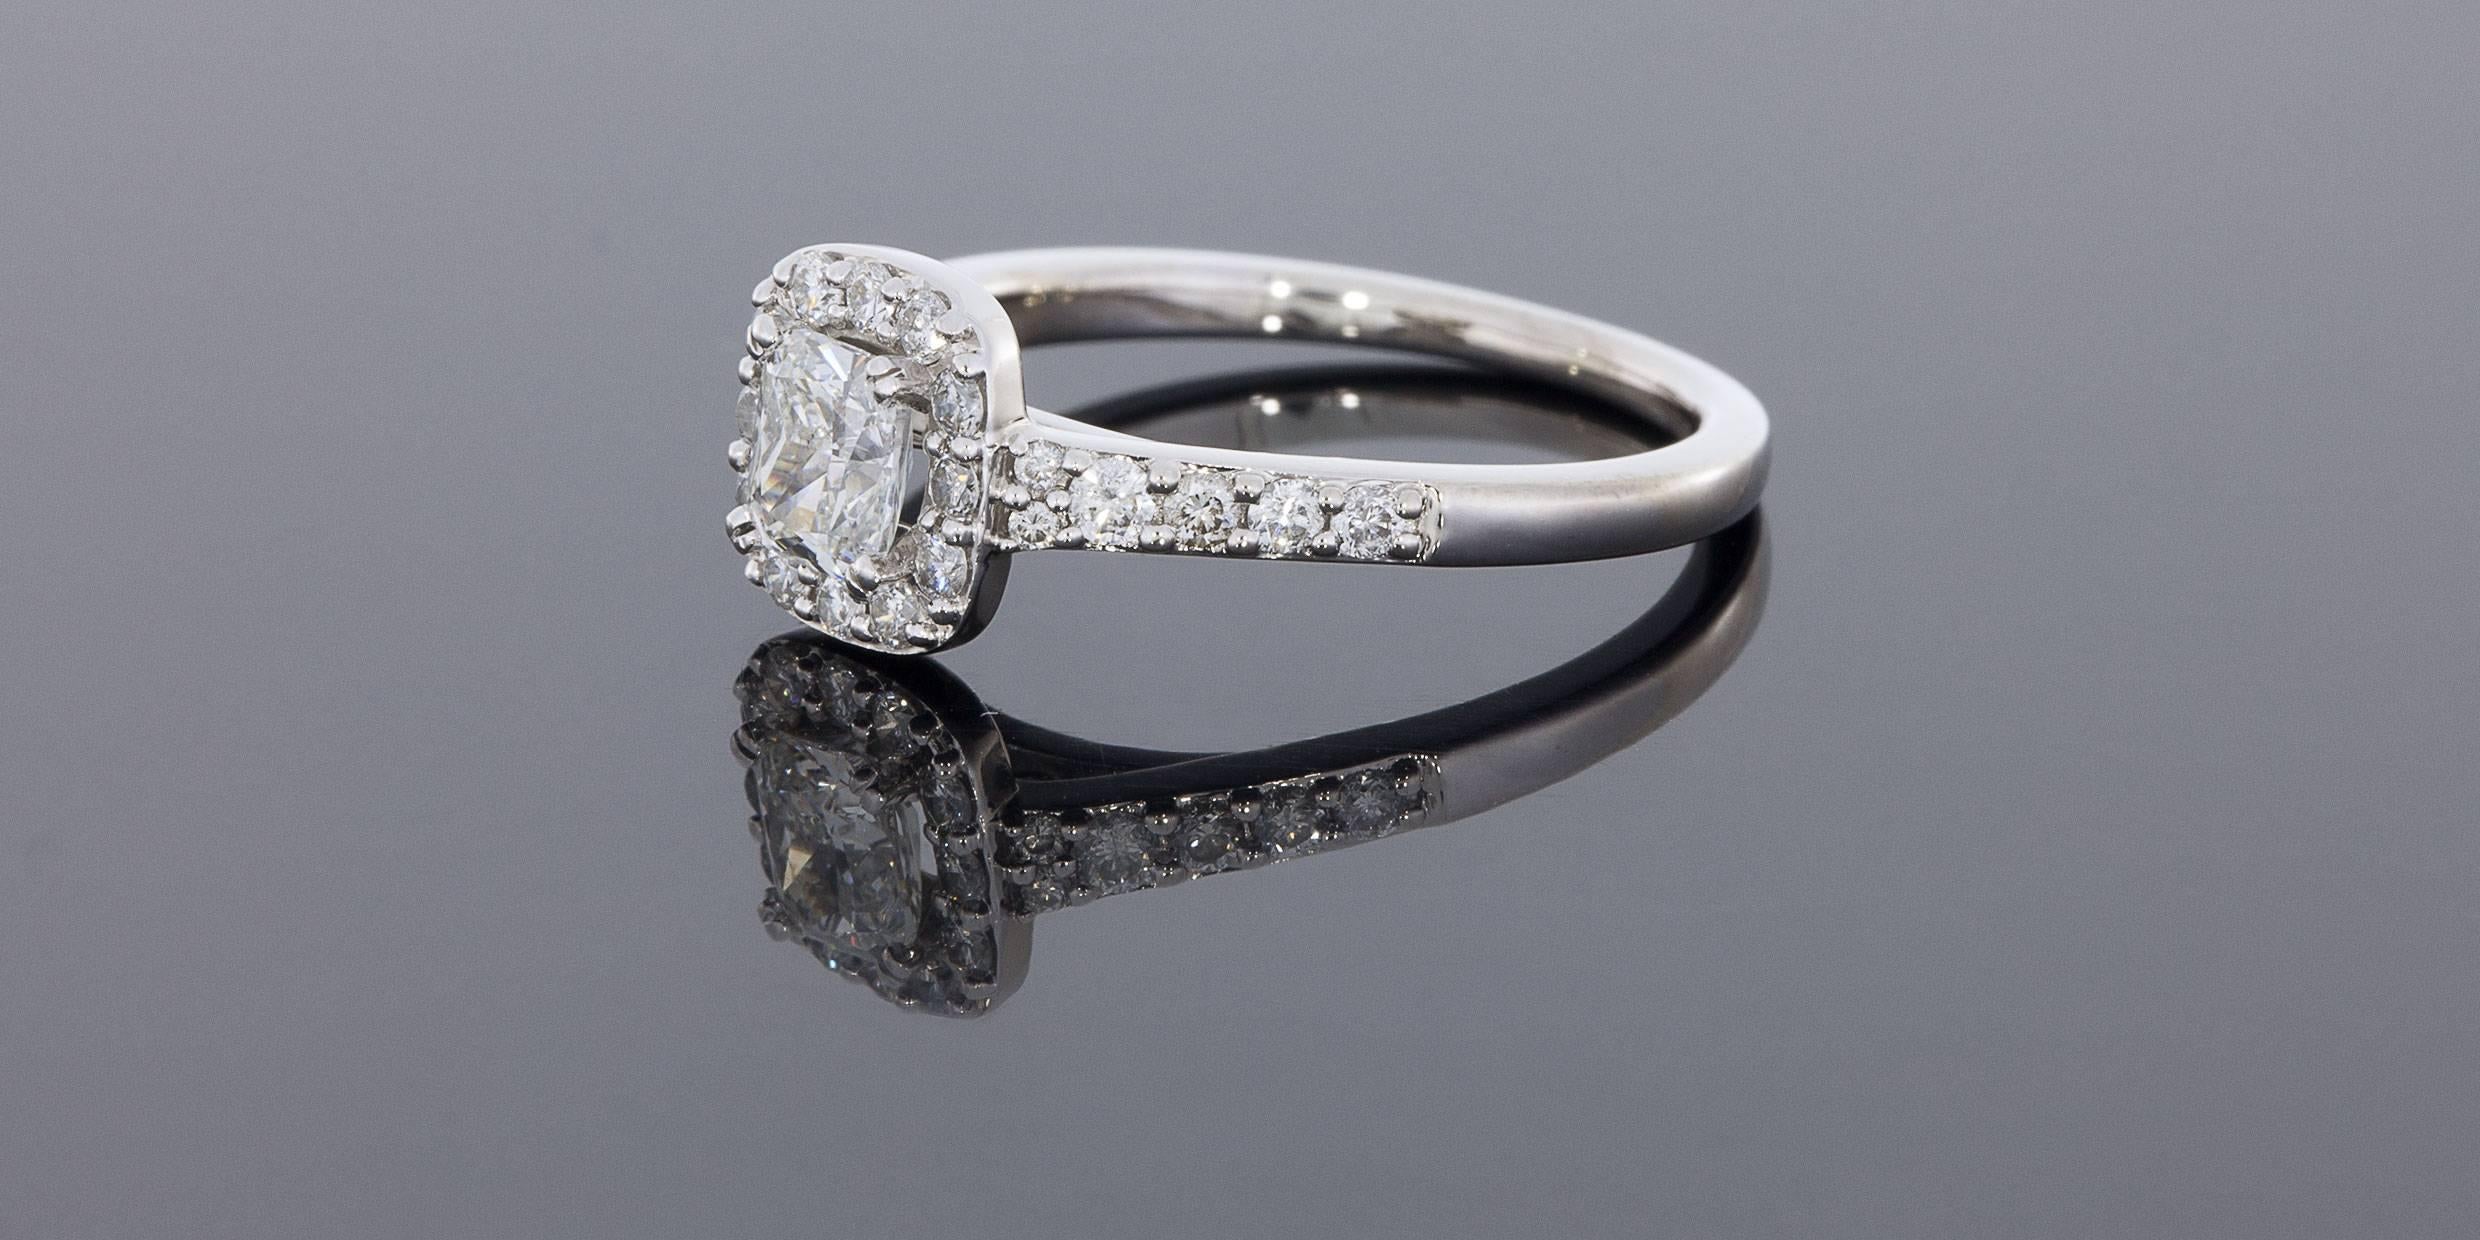 This gorgeous white gold diamond ring features a beautiful cushion brilliant cut center diamond with lots of sparkle! This center diamond weighs 1/2 carat & grades as I/SI2 in quality. It is split prong set in a shared prong diamond halo. The